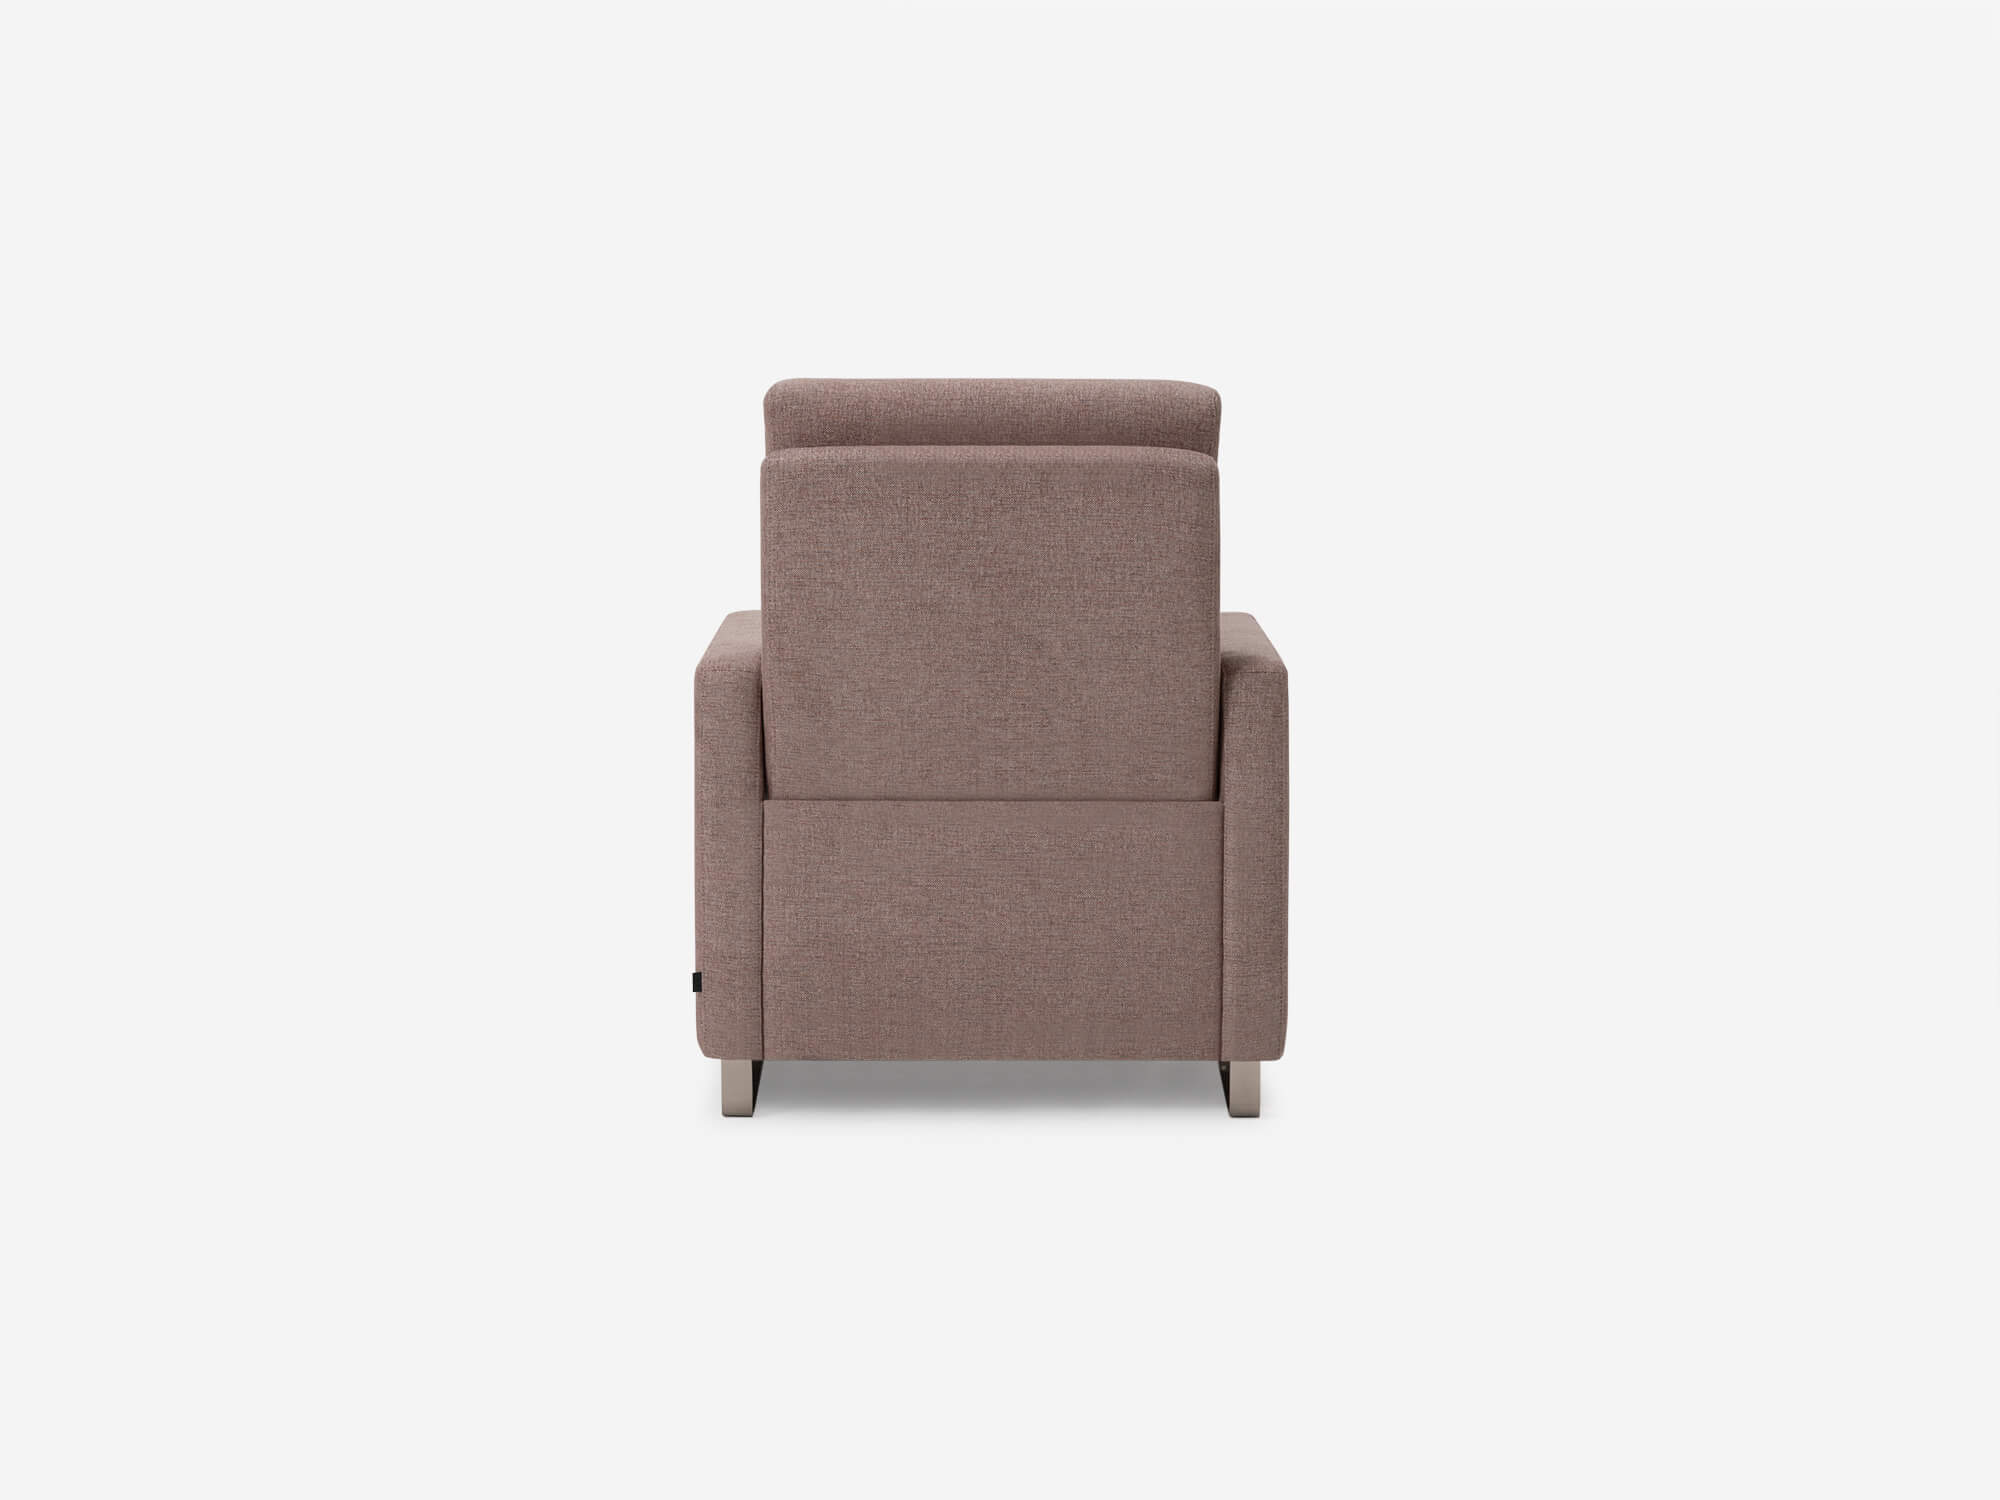 lawrence reclining chair - fabric